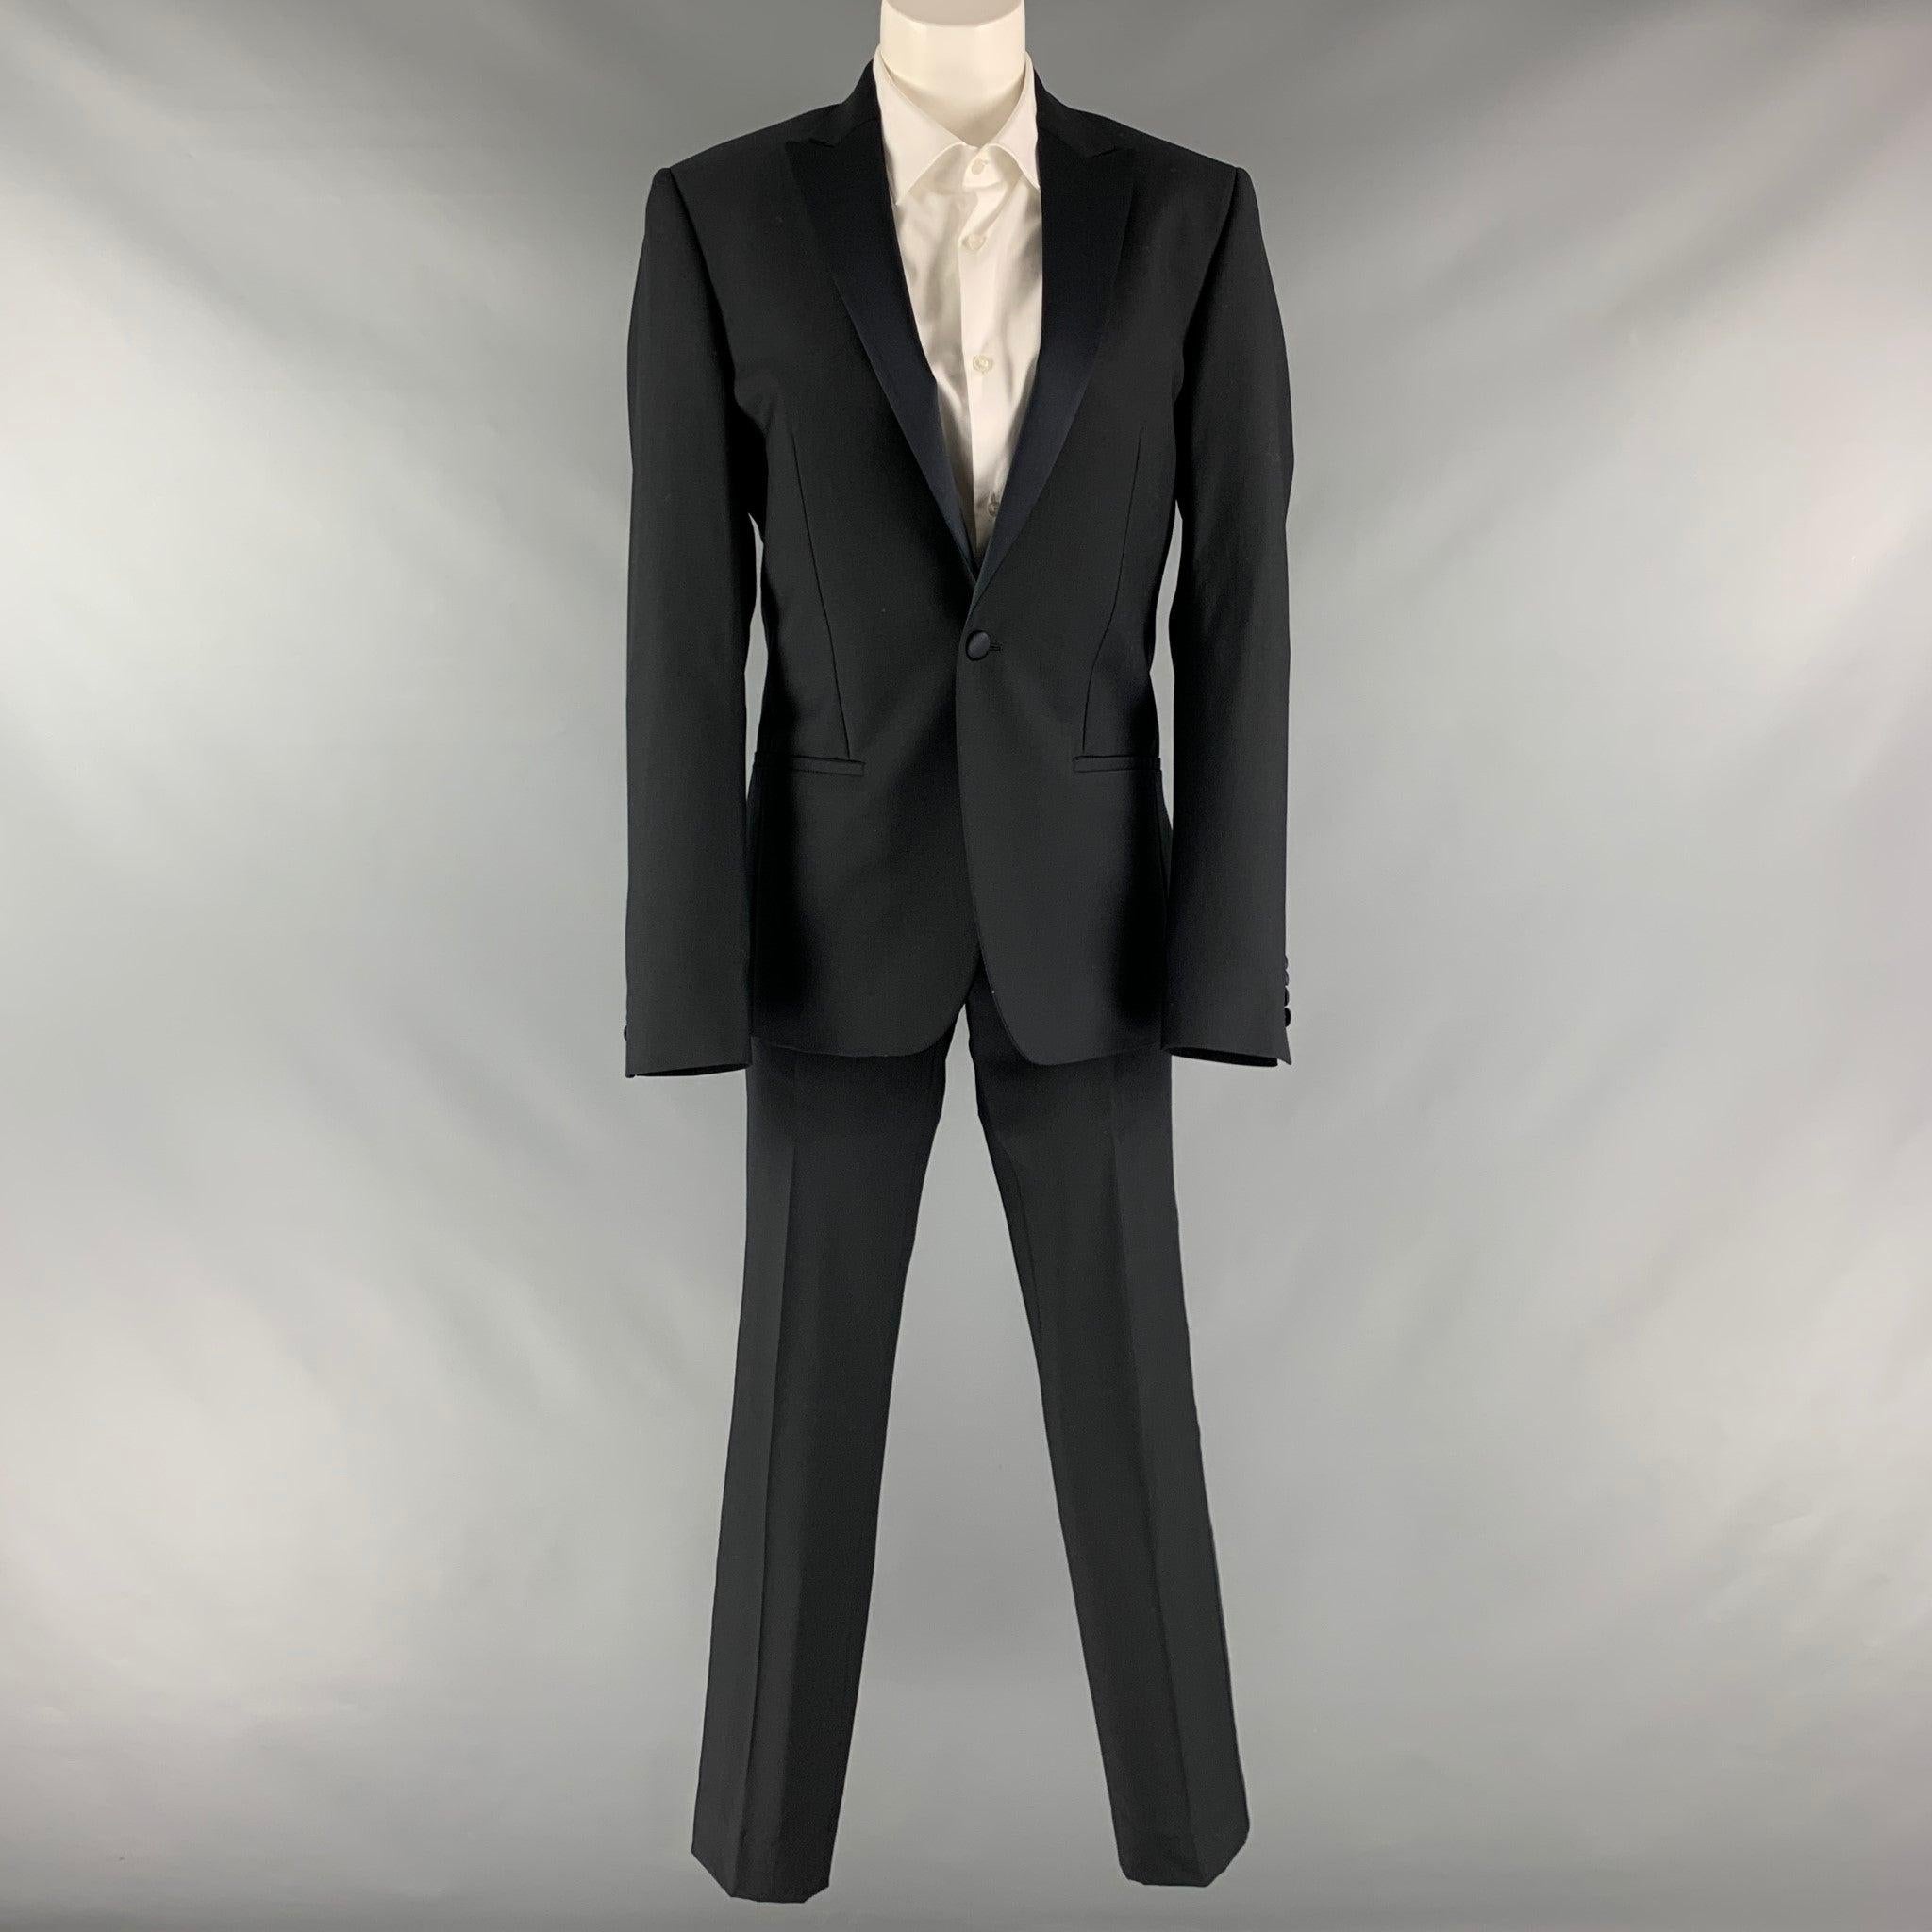 CALVIN KLEIN COLLECTION suit comes in a black wool material with a full liner and includes a single breasted, single button sport coat with a peak lapel and matching flat front tuxedo style trousers. Made in Italy.Excellent Pre-Owned Condition.